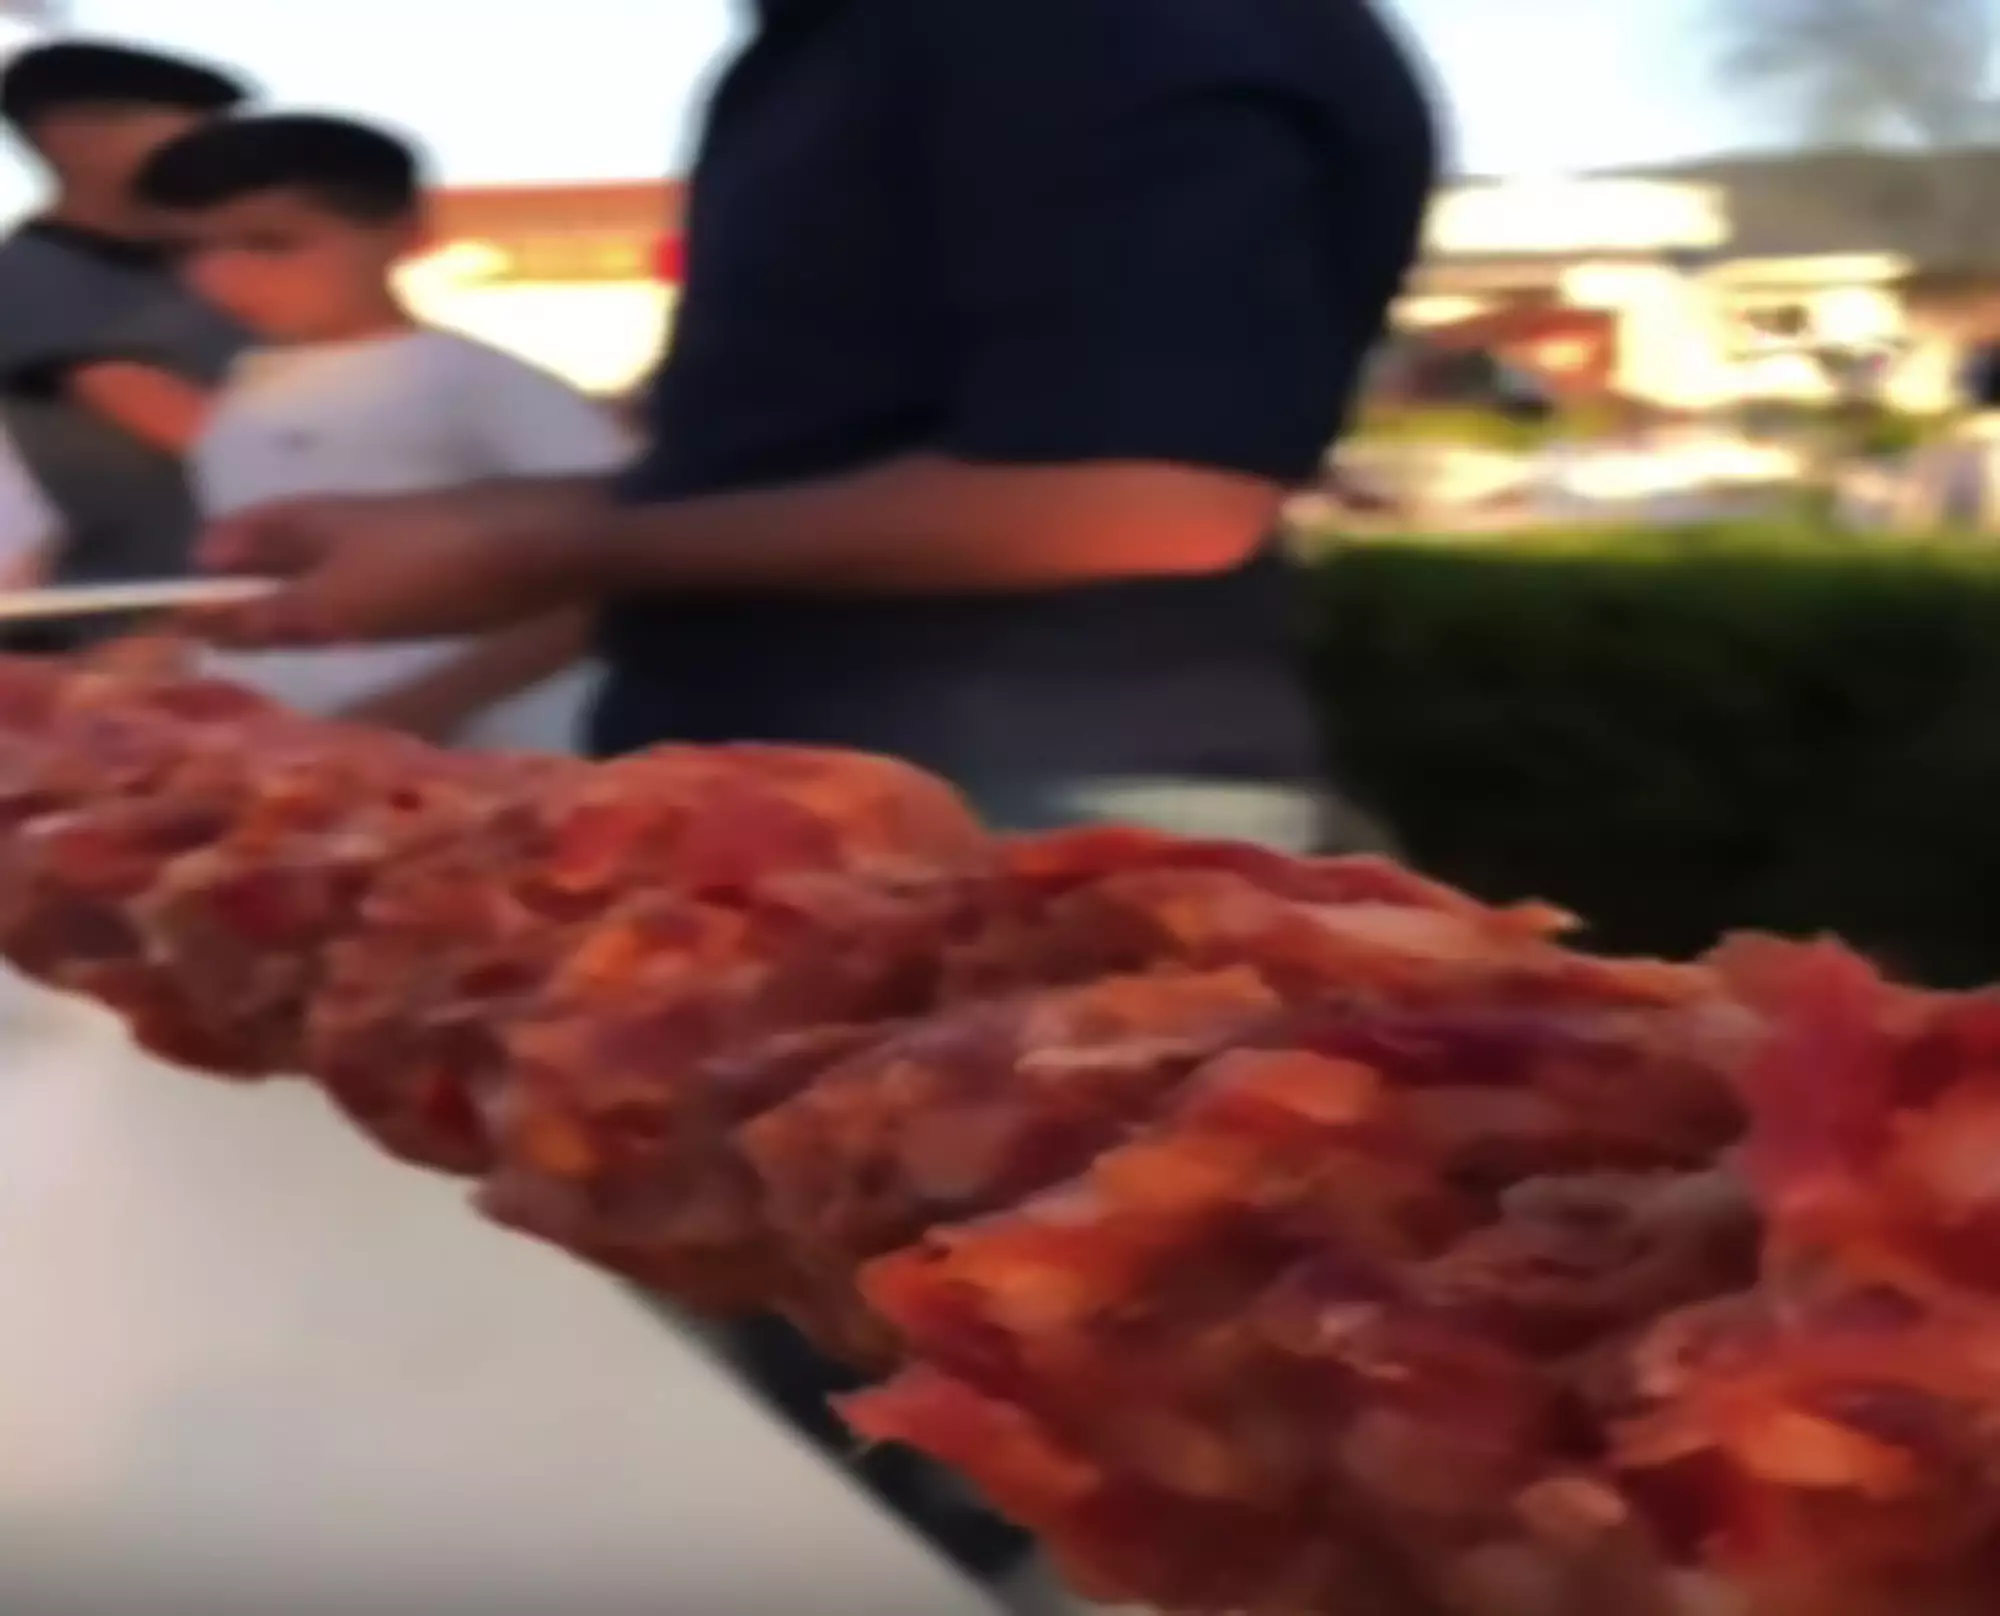 A kebab shop owner made a 60m-long kebab for his son's wedding.